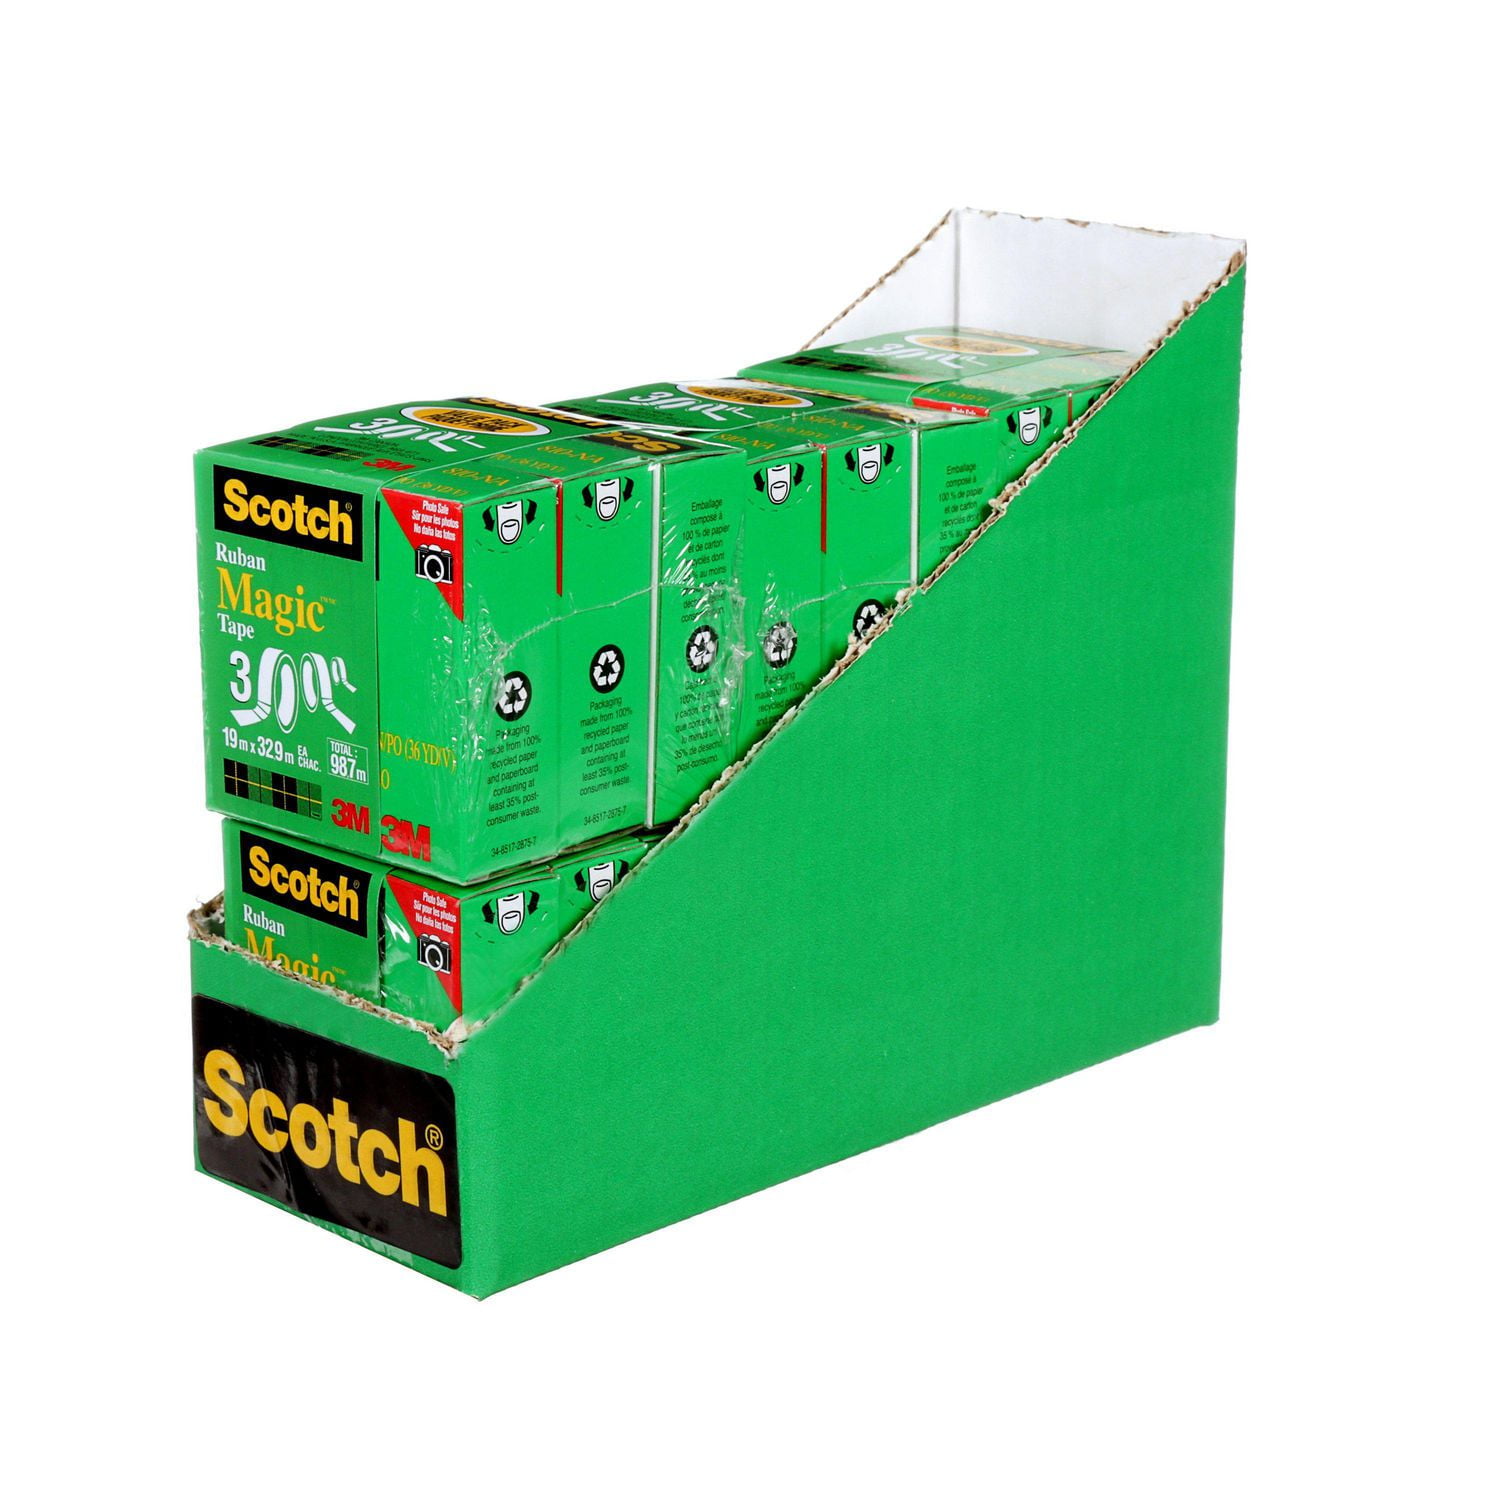 Scotch® Magic™ Invisible Tape, 810D, with refillable dispenser, 3/4 in x 36  yd (19 mm x 33 m)